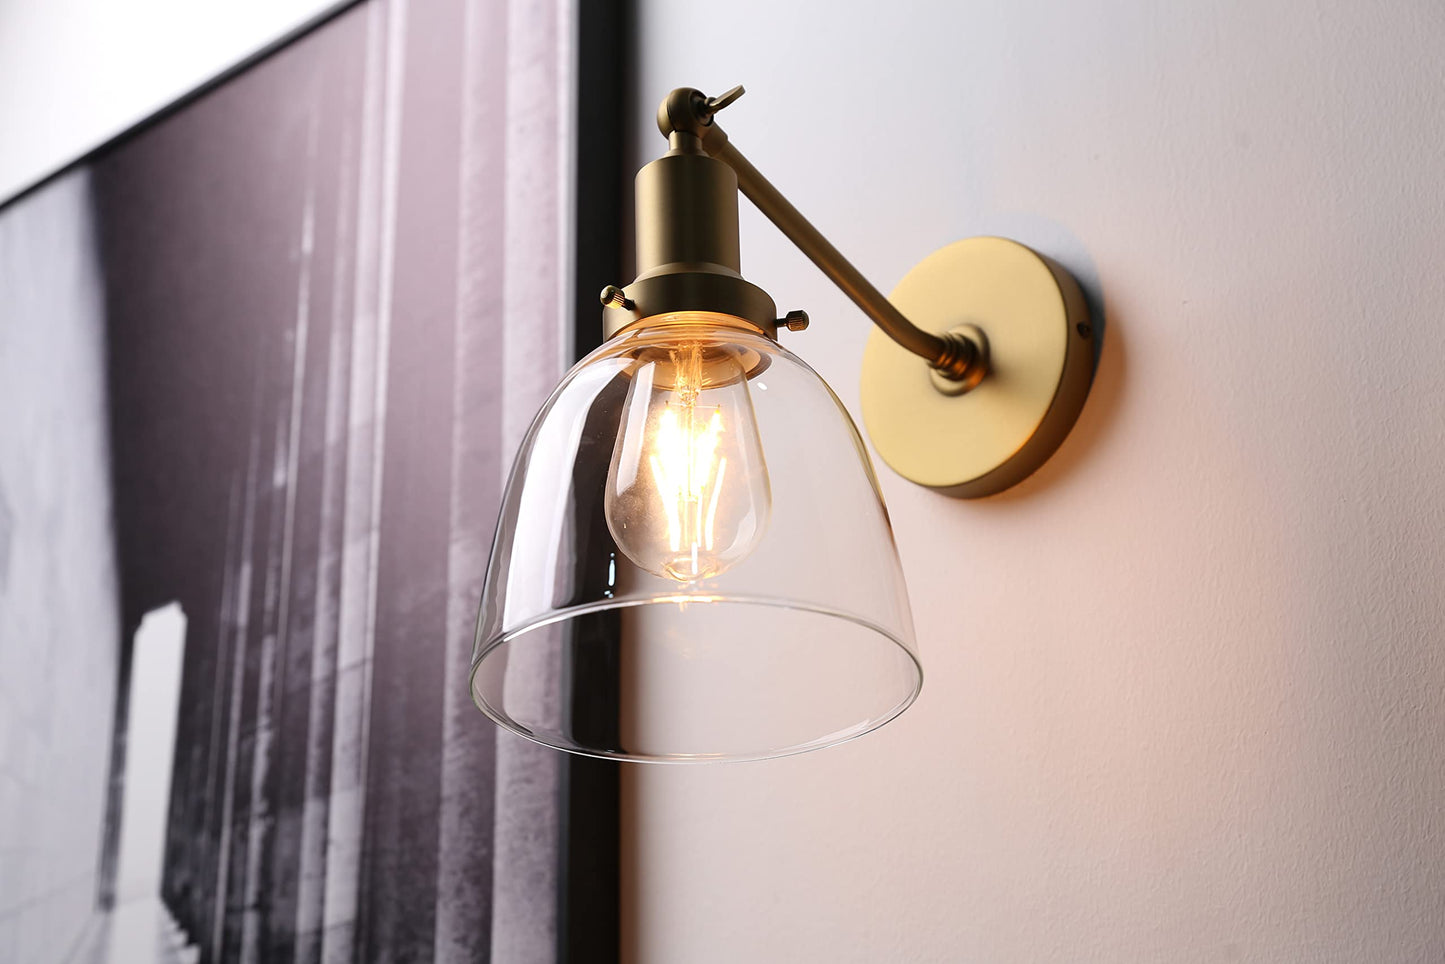 Industrial Vintage Slope Pole Wall Sconce Light Lamp Fixture